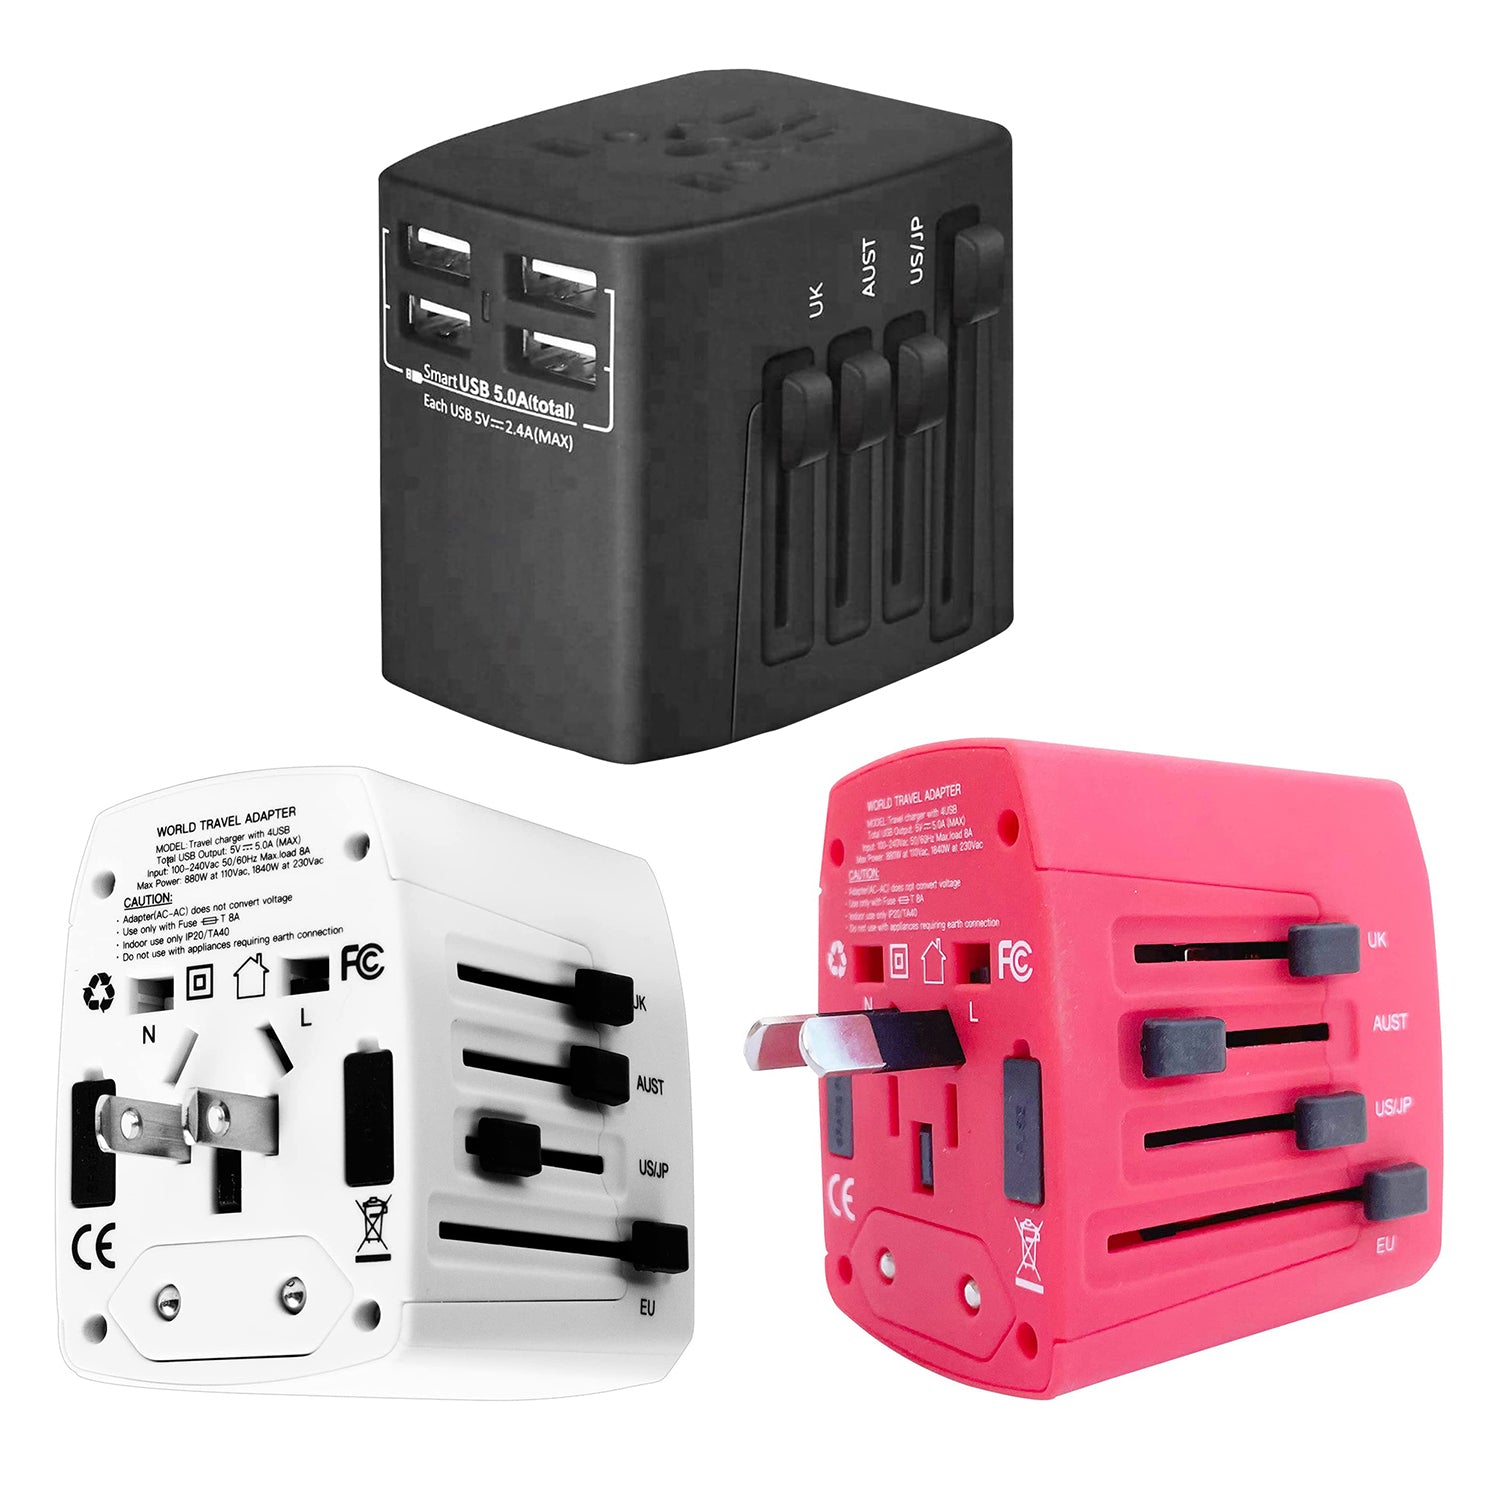 5Core Universal Travel Adapter International Power Adapters 3 Pack Multicharger Plug w 4 USB Ports